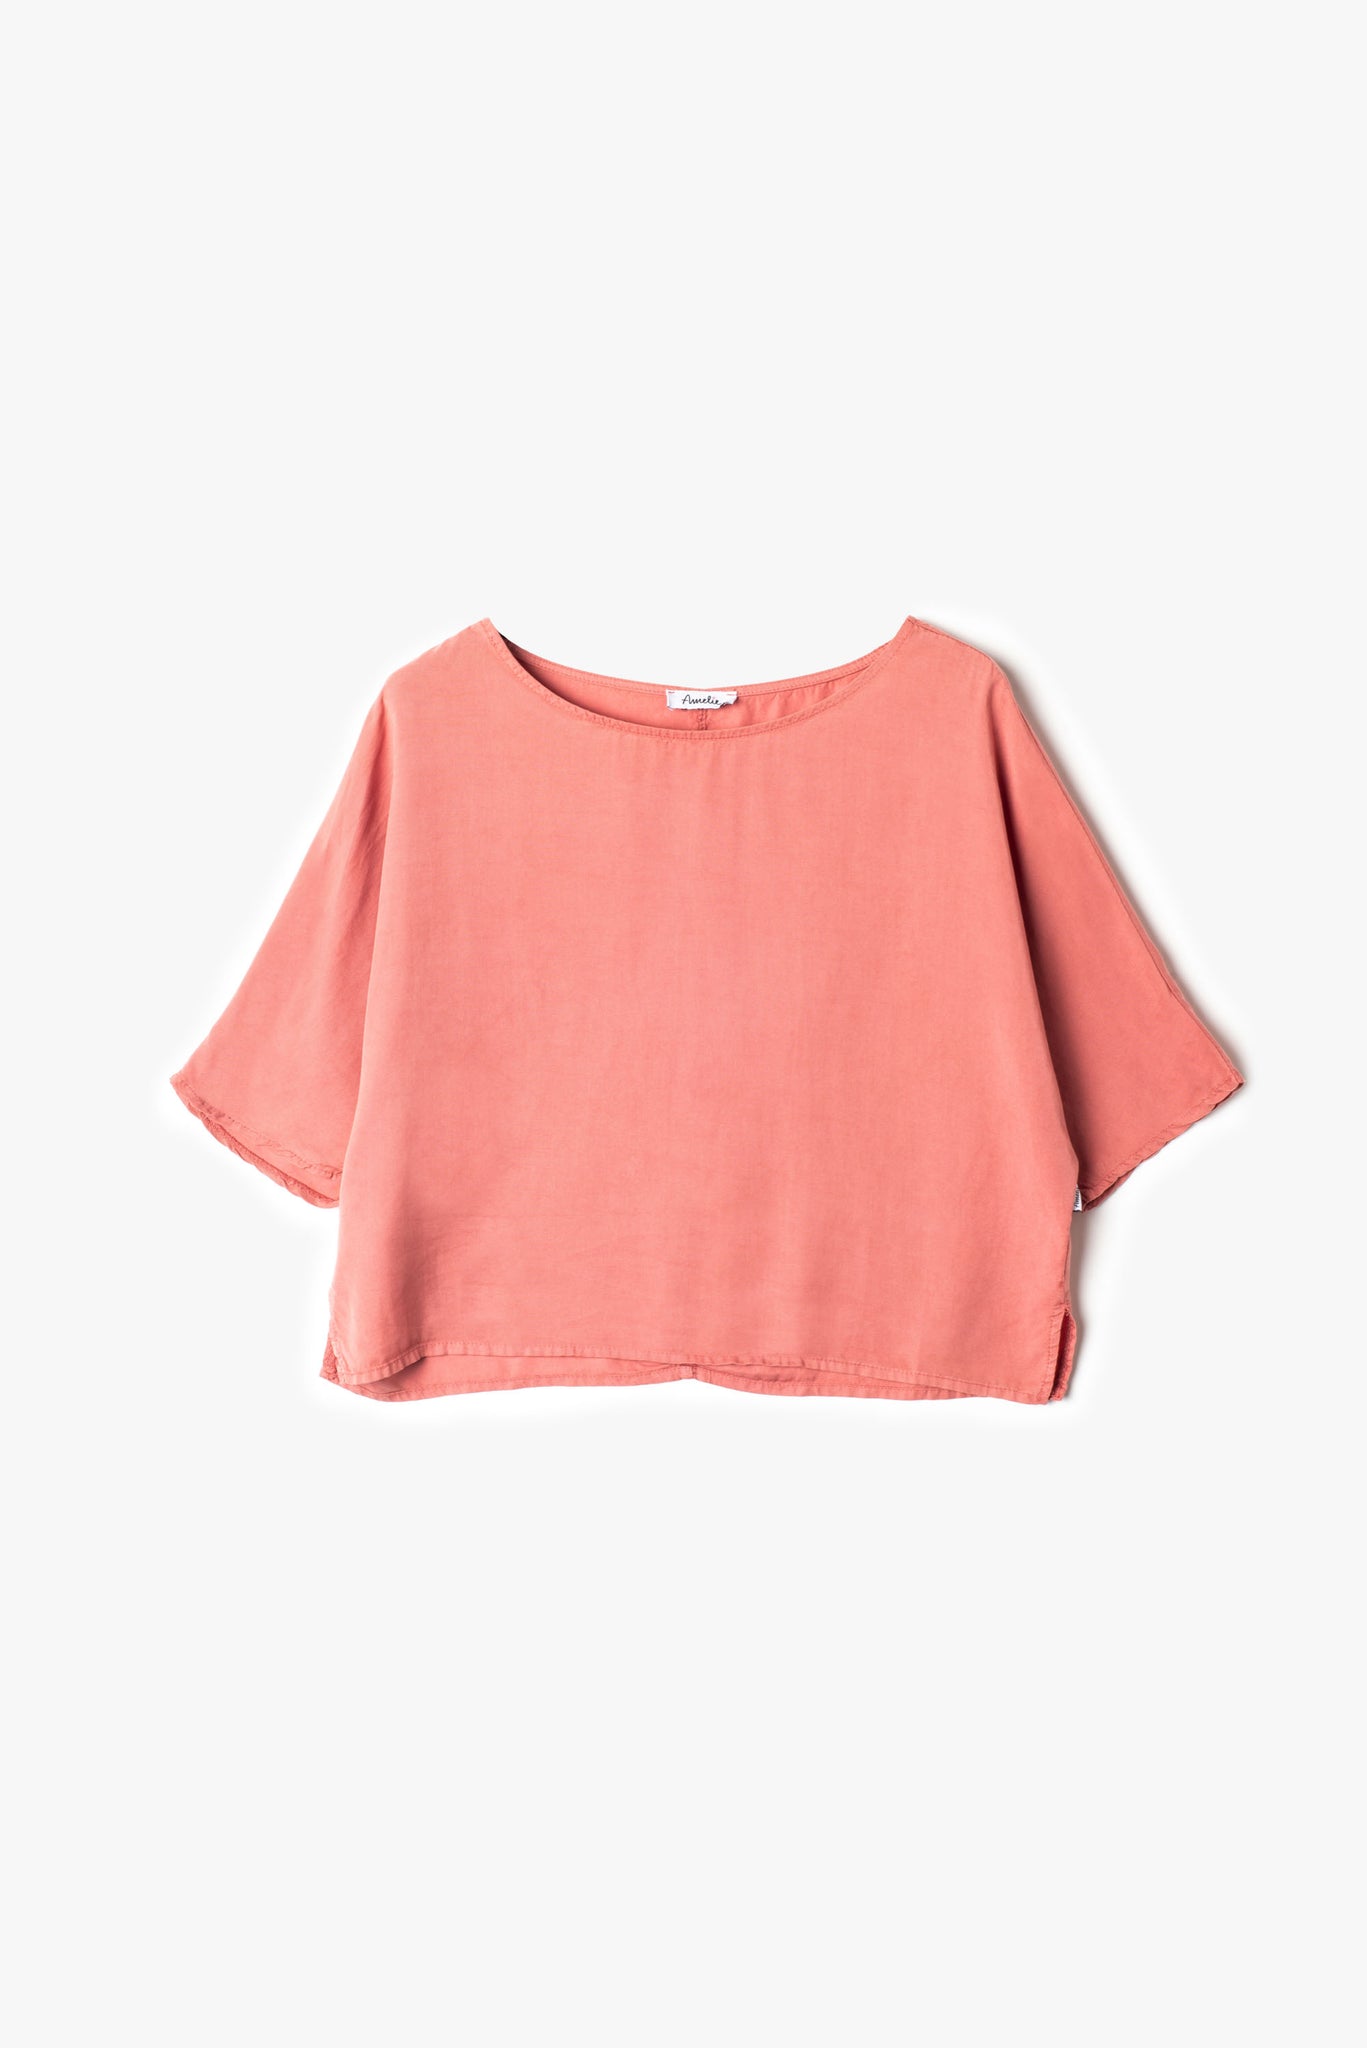 Tencel cropped top